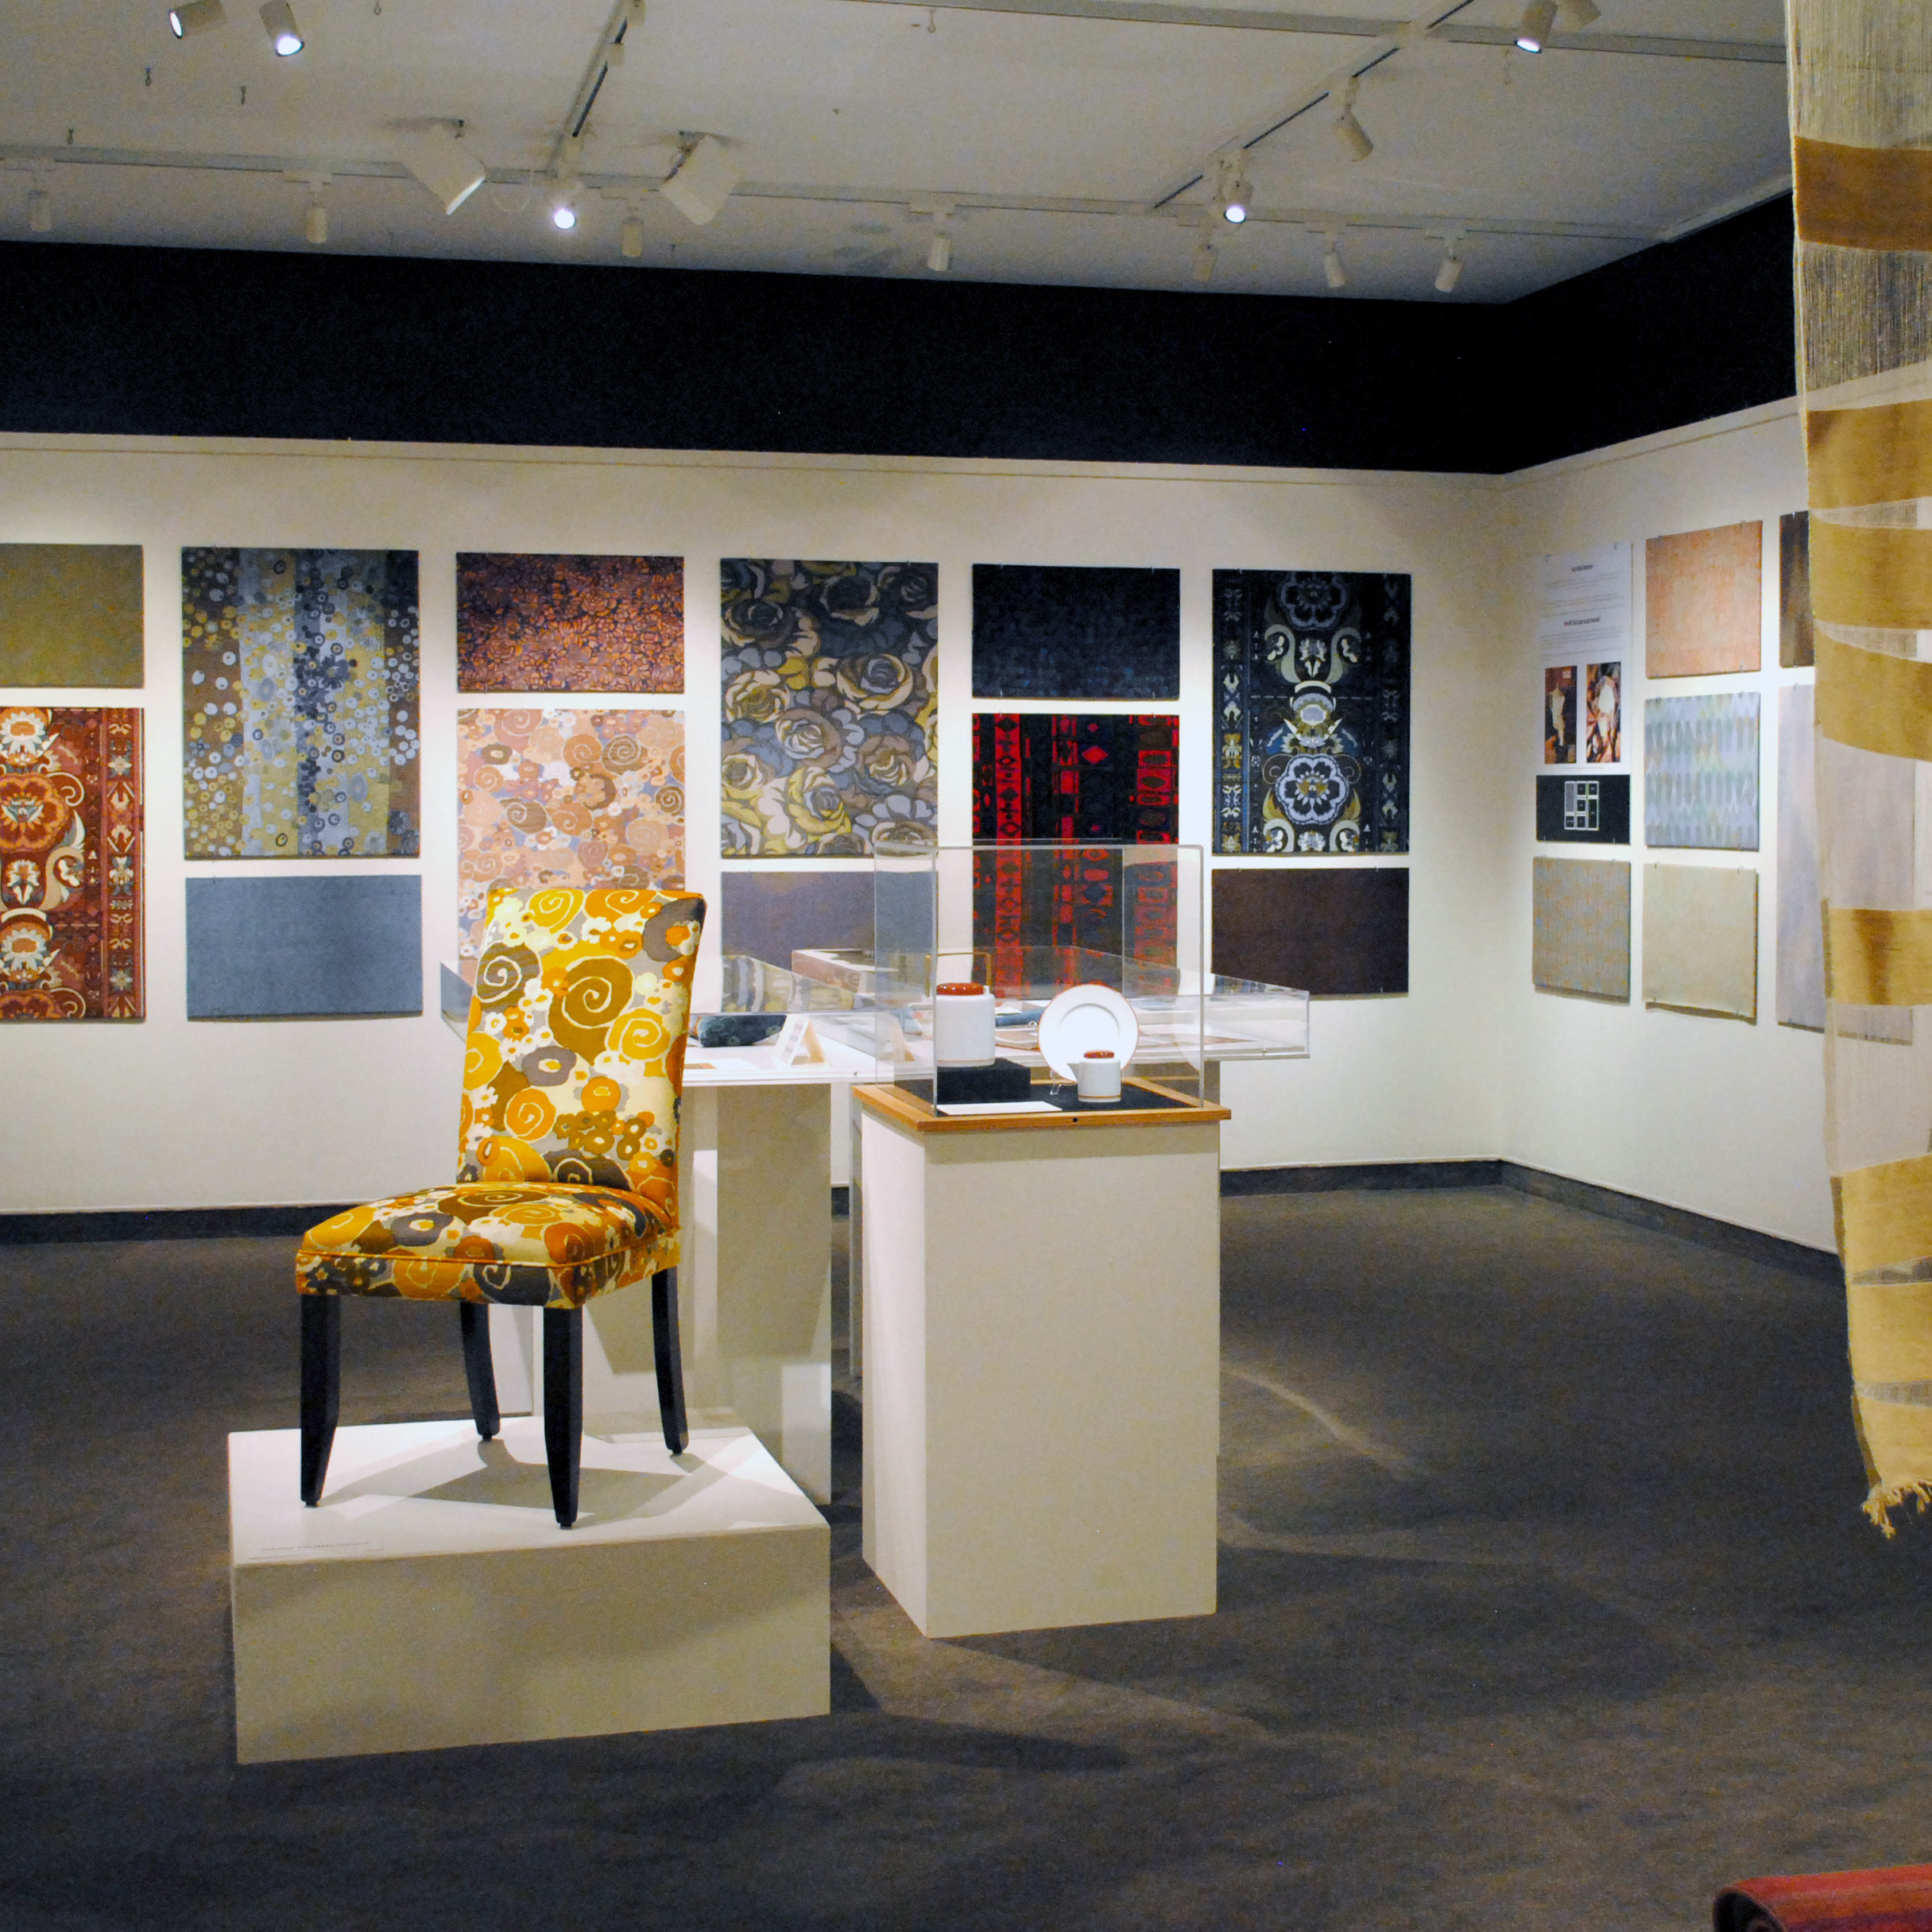 Jack Lenor Larsen at 90 exhibition with textile designs on display